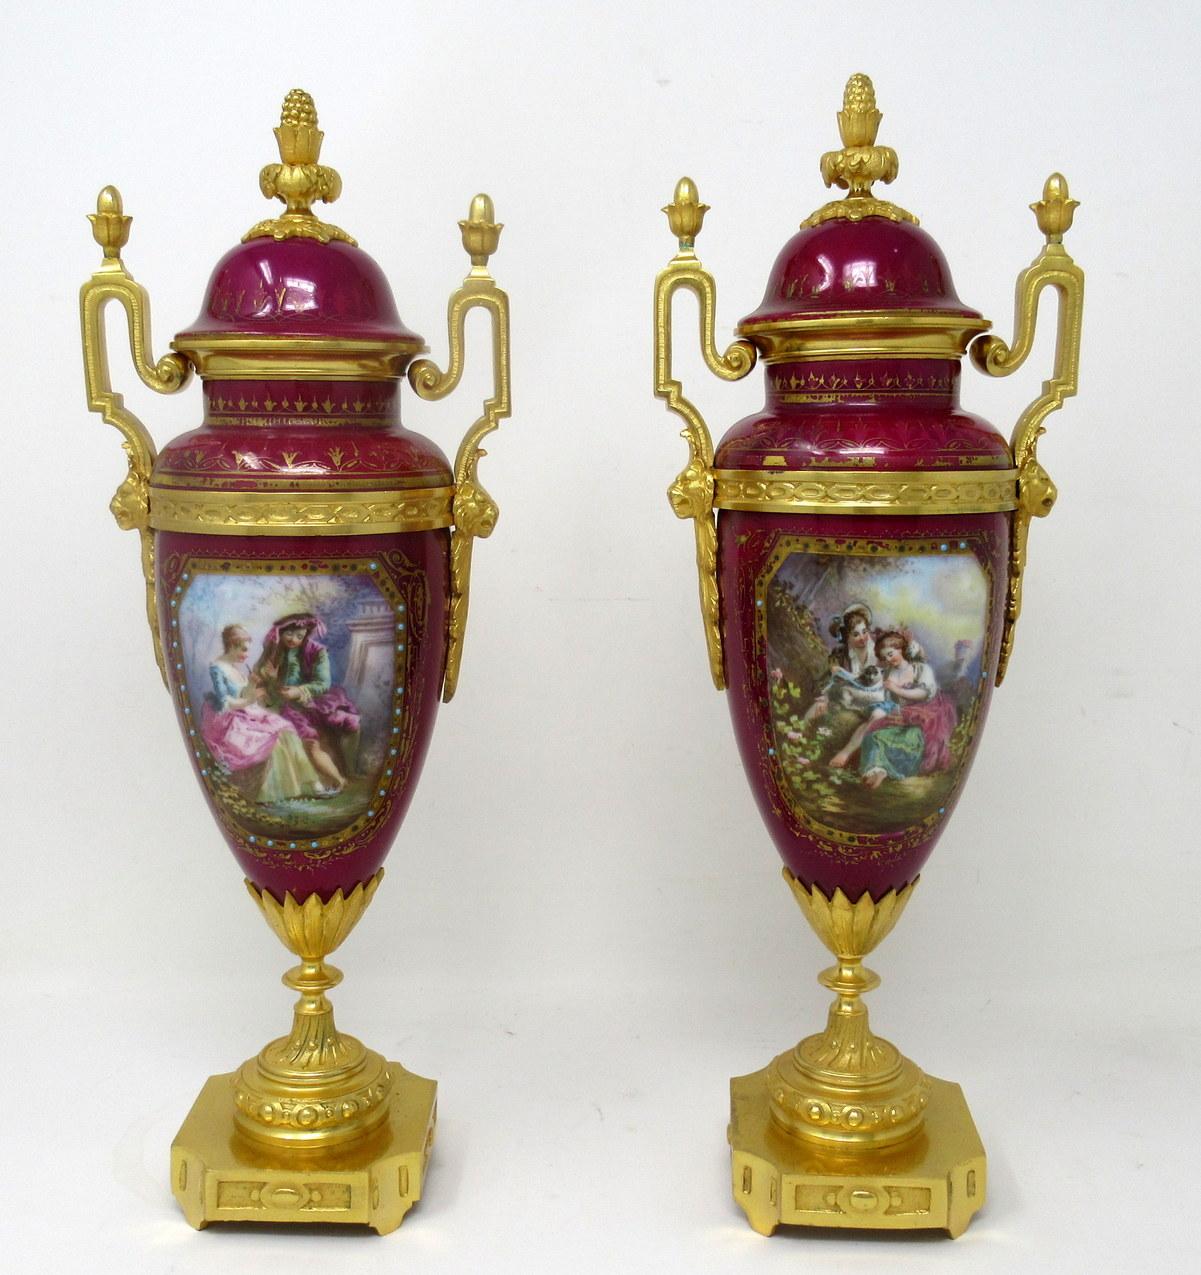 Stunning pair French sevres soft paste hand decorated rich burgundy porcelain and ormolu twin scroll handle table or mantle urns of traditional form and of outstanding quality, made during the last half of the Nineteenth century. 

Each urn of